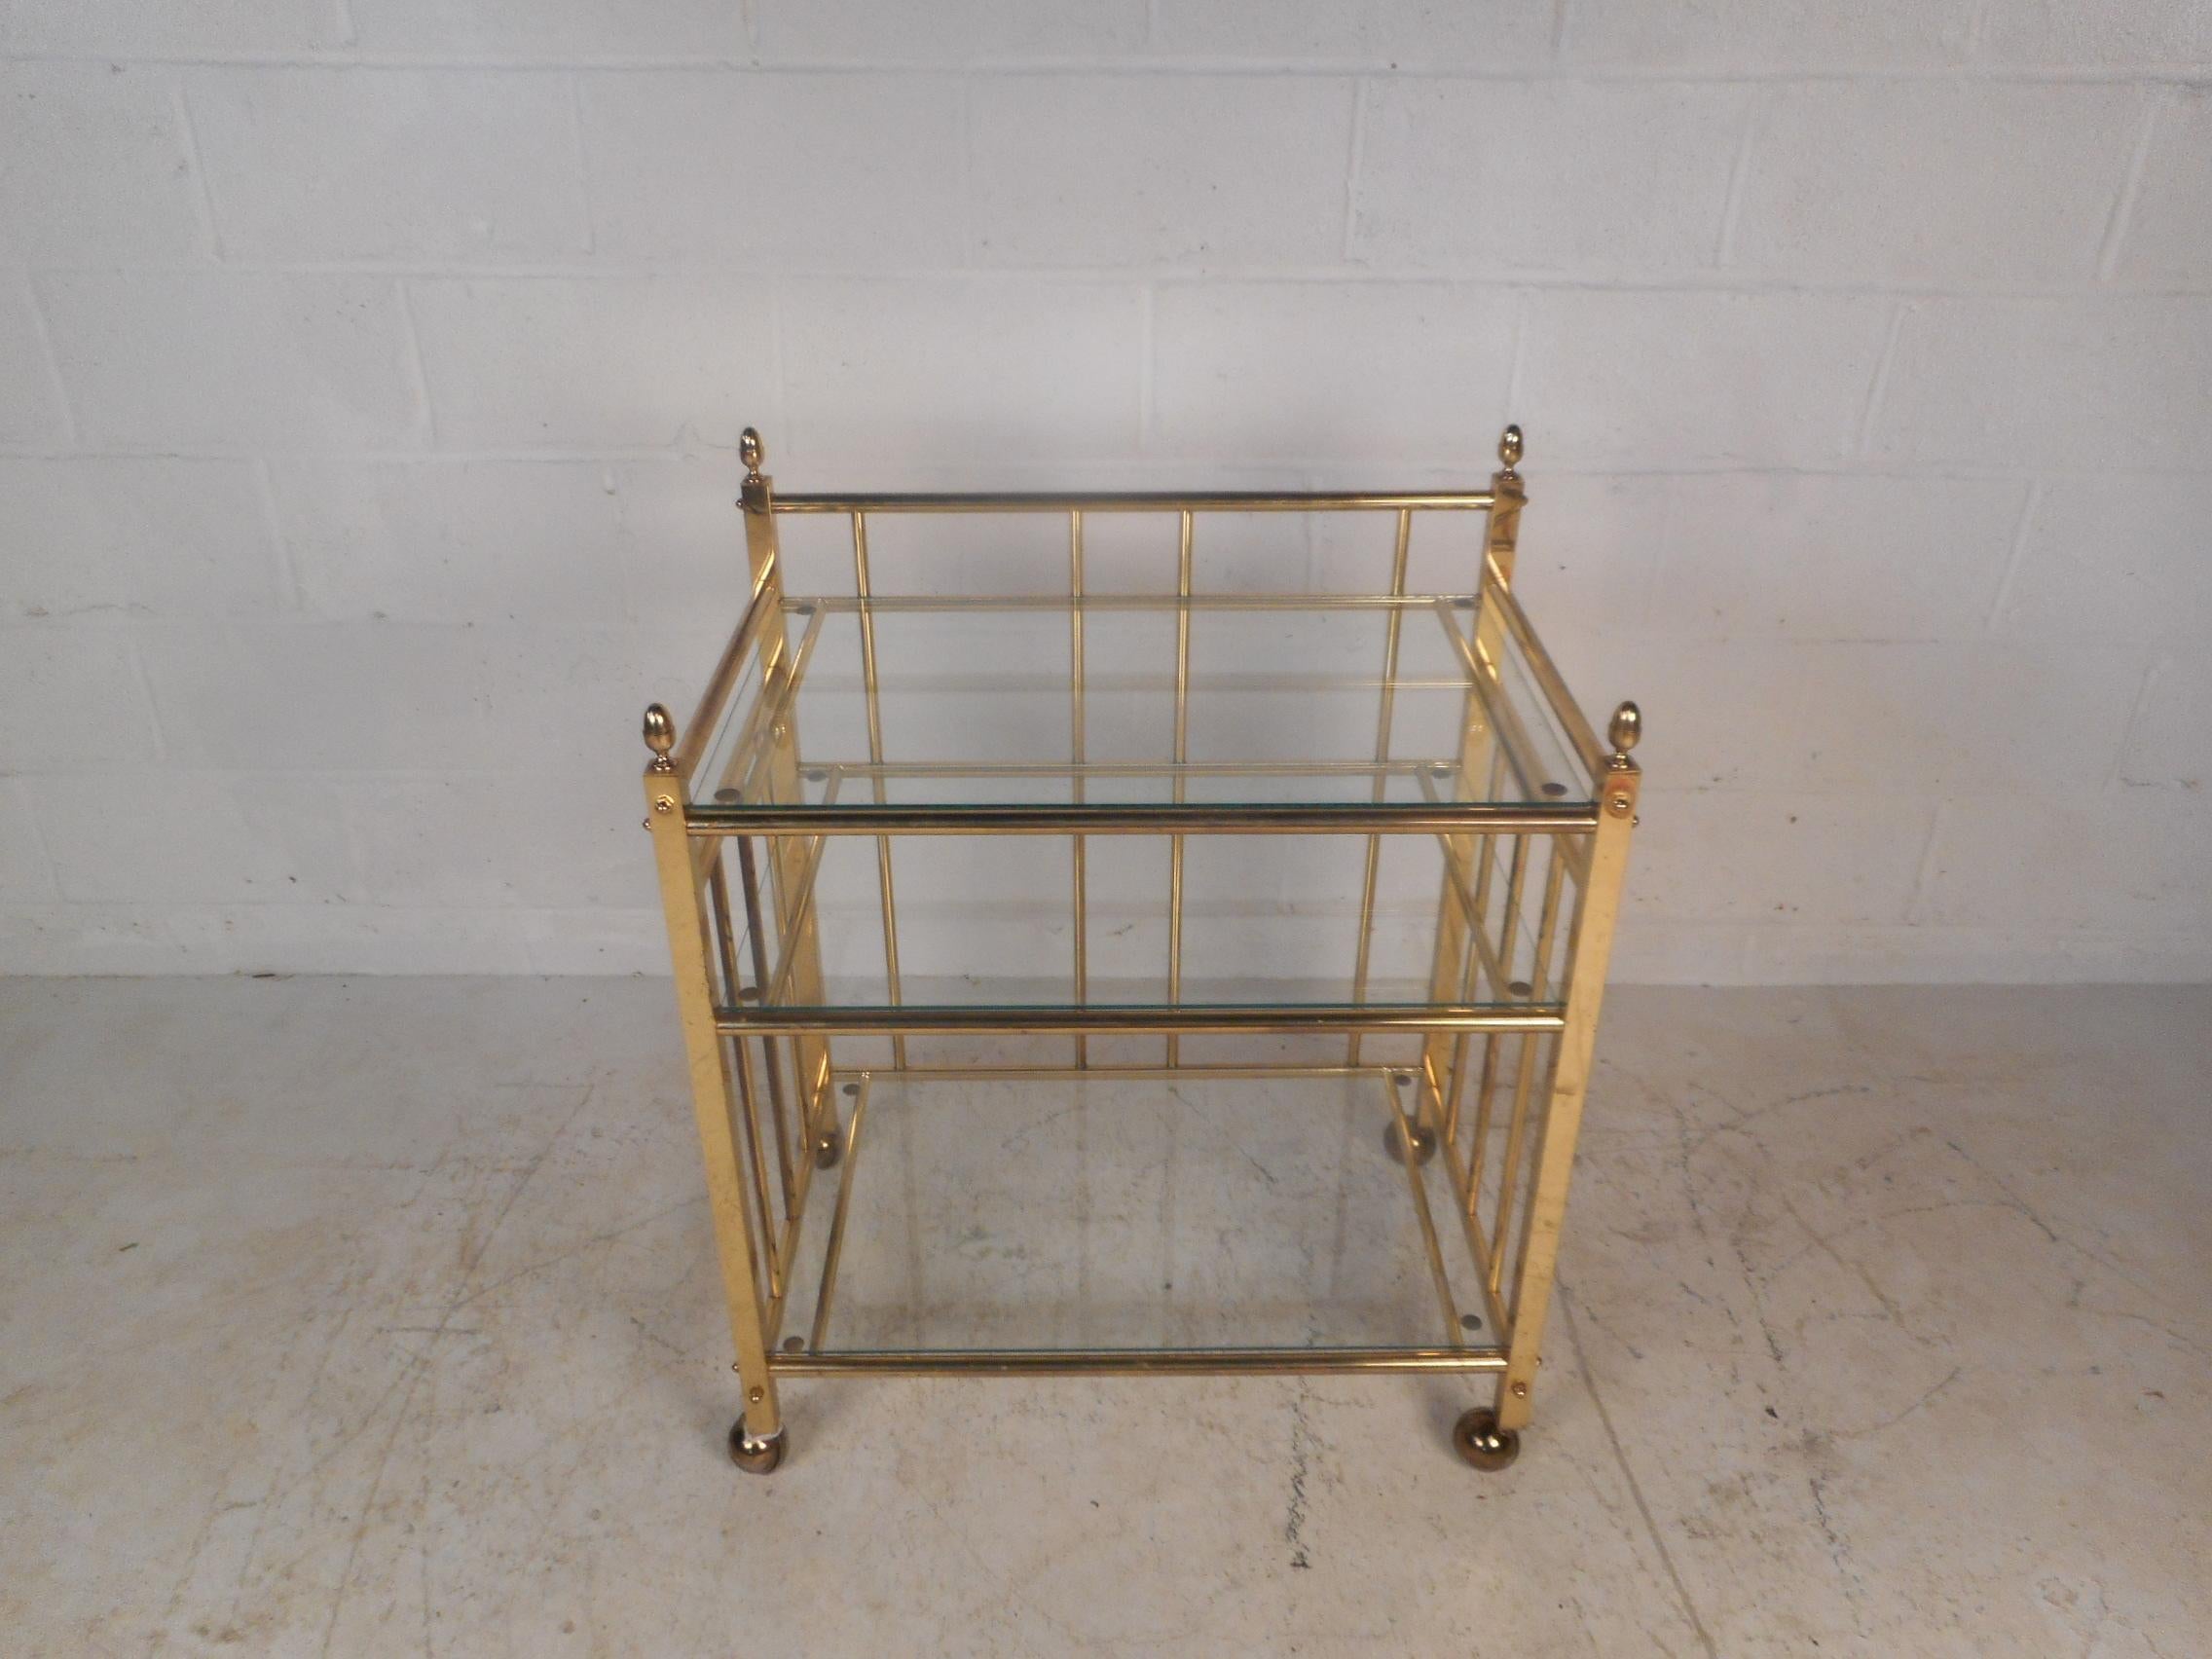 This sleek midcentury bar cart features a metal rod frame with three-tiers containing glass shelves, ensuring plenty of room for storage. This well designed serving cart has sculpted fixtures on top of each end and sits on top of four castors adding